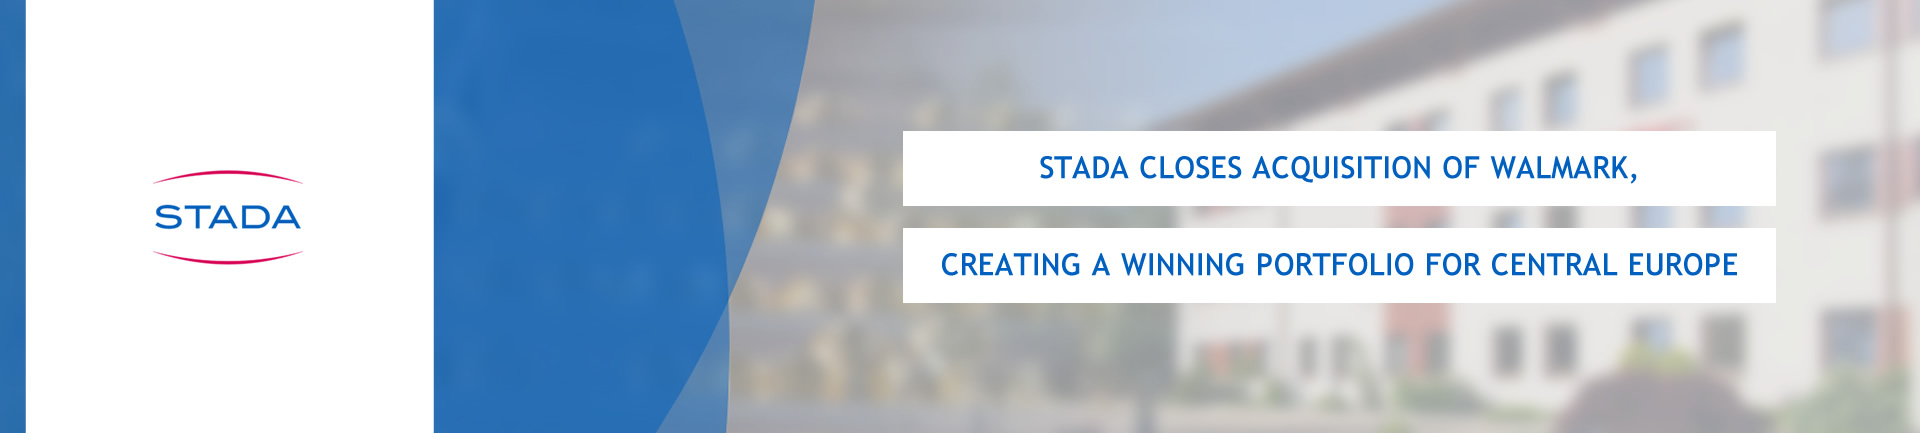 STADA closes acquisition of Walmark, creating a winning portfolio for Central Europe